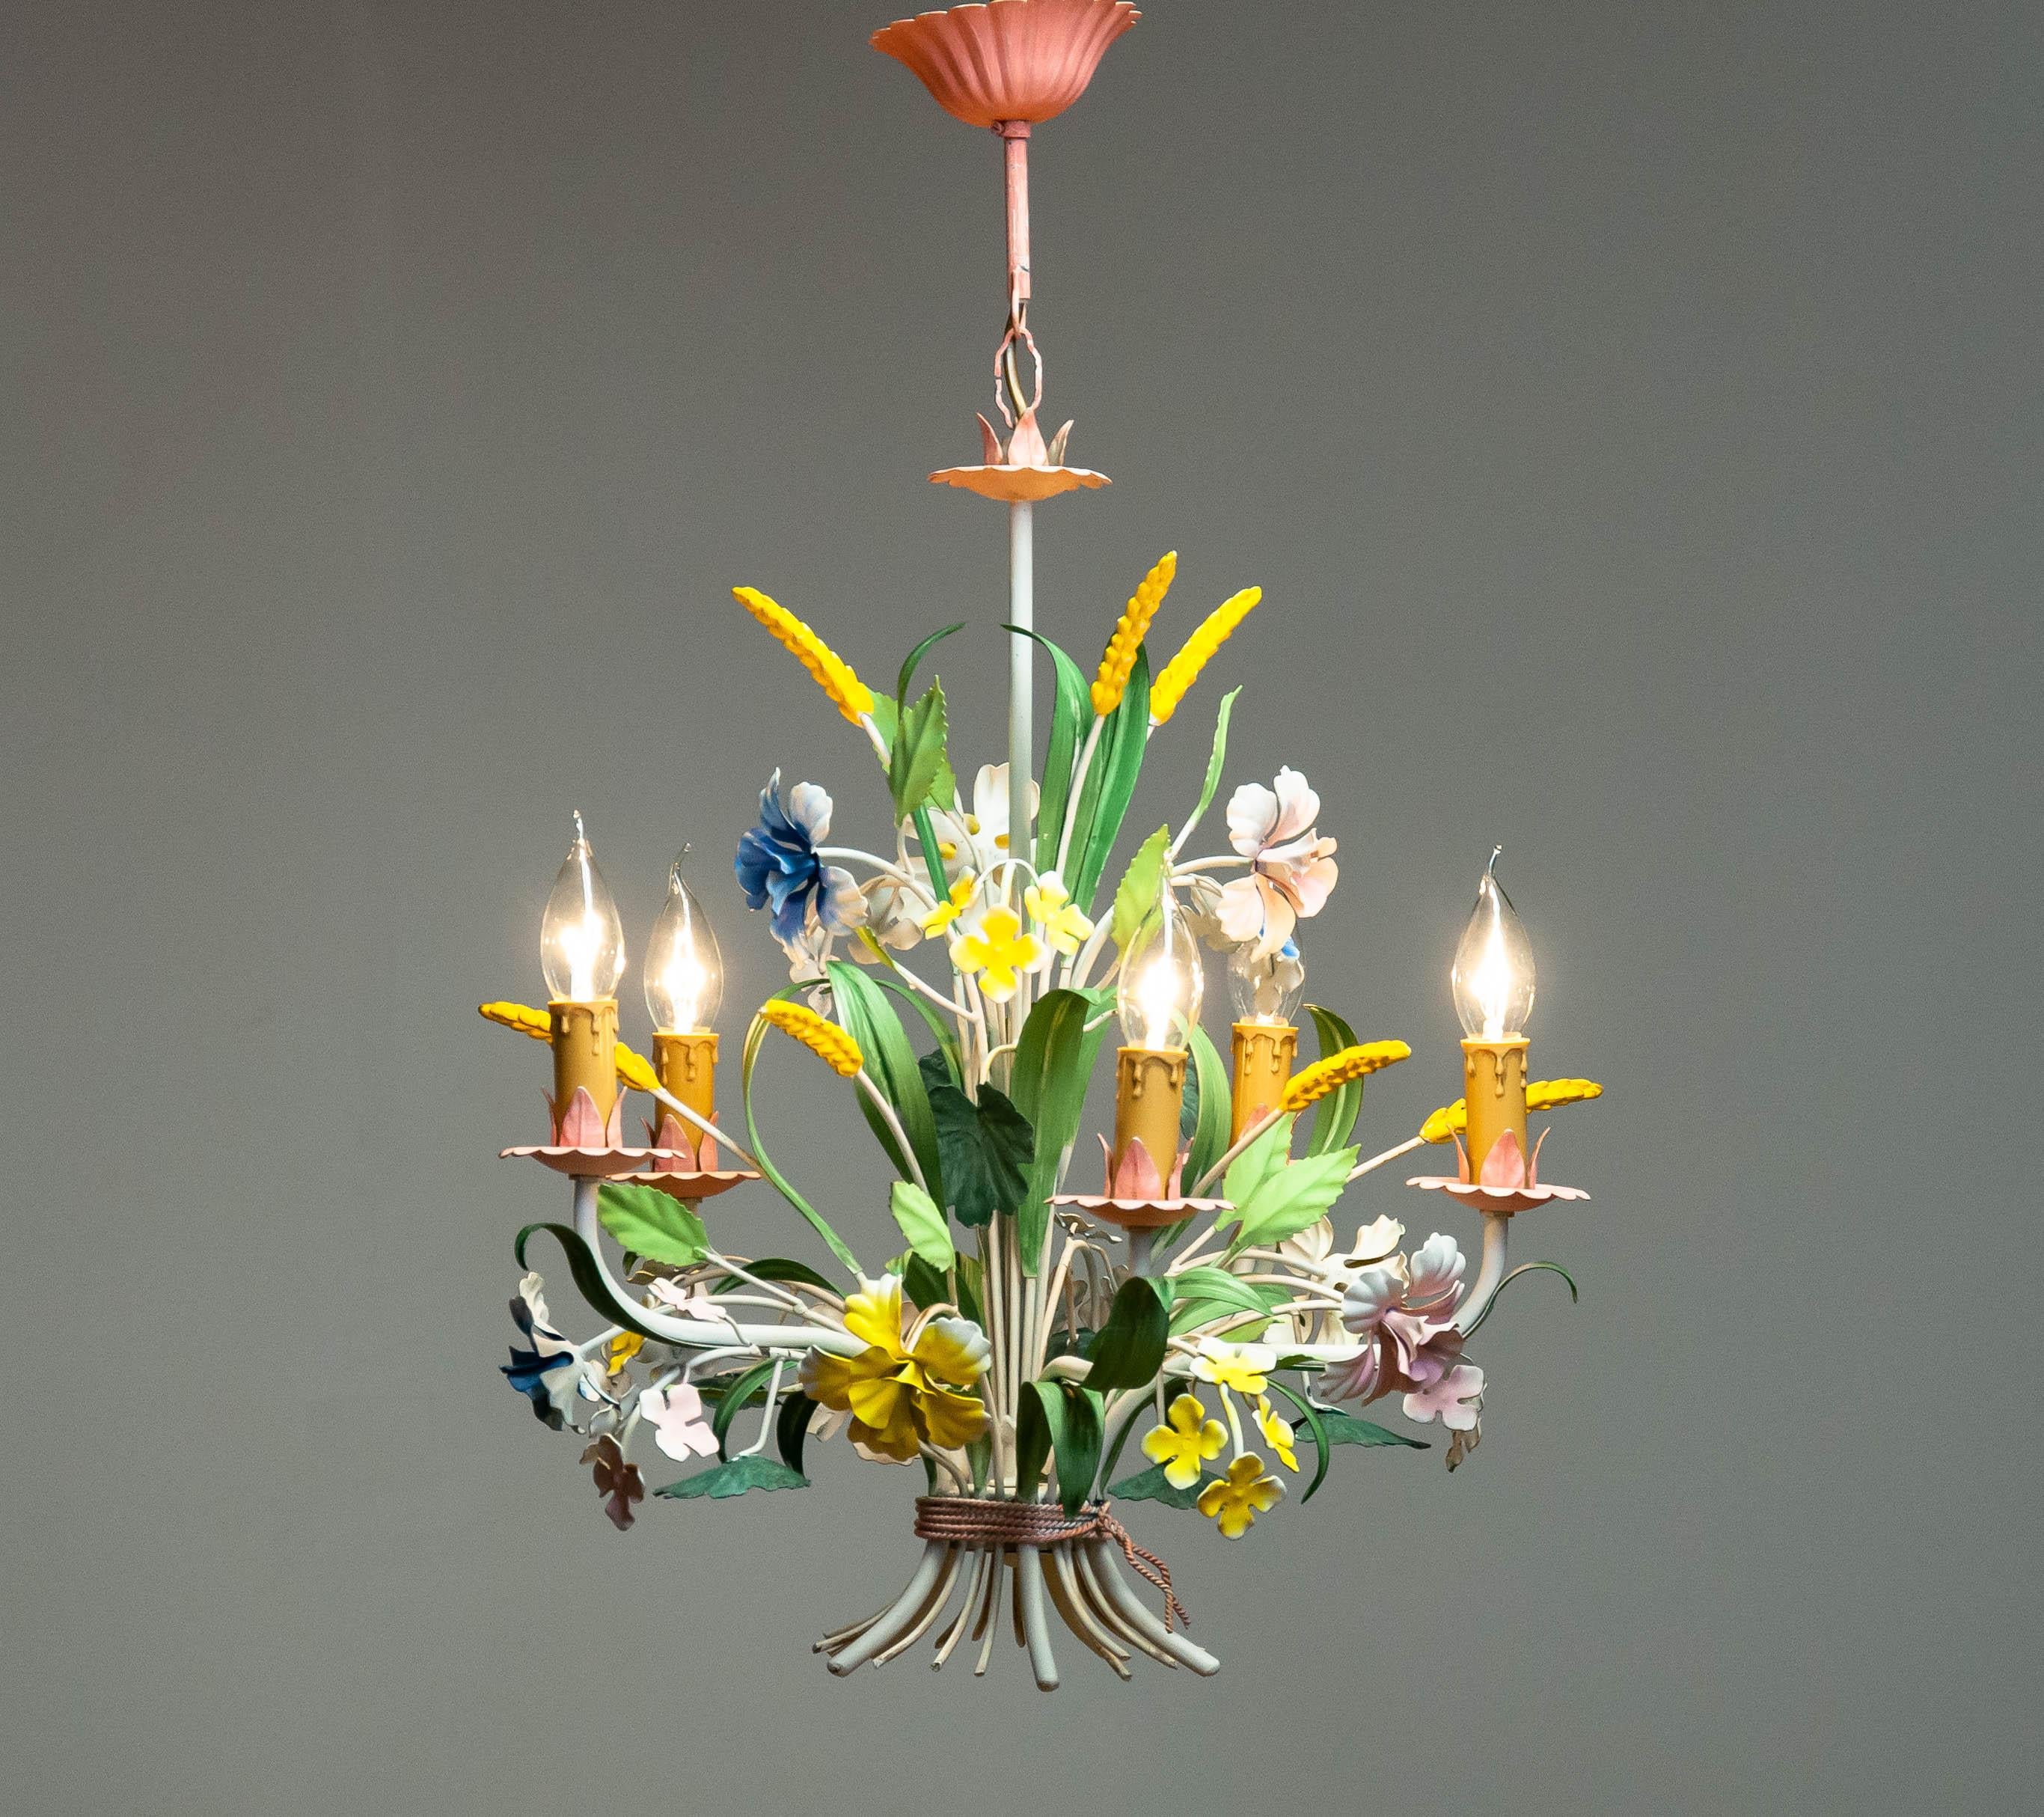 Absolutely beautiful tole painted chandelier Made in the 1960s in Italy. Beautiful bright colors ar used to give this chandelier her fresh appearance and character.
Wiring has been replaced in a later period.
Technically 100%.
The given measurement